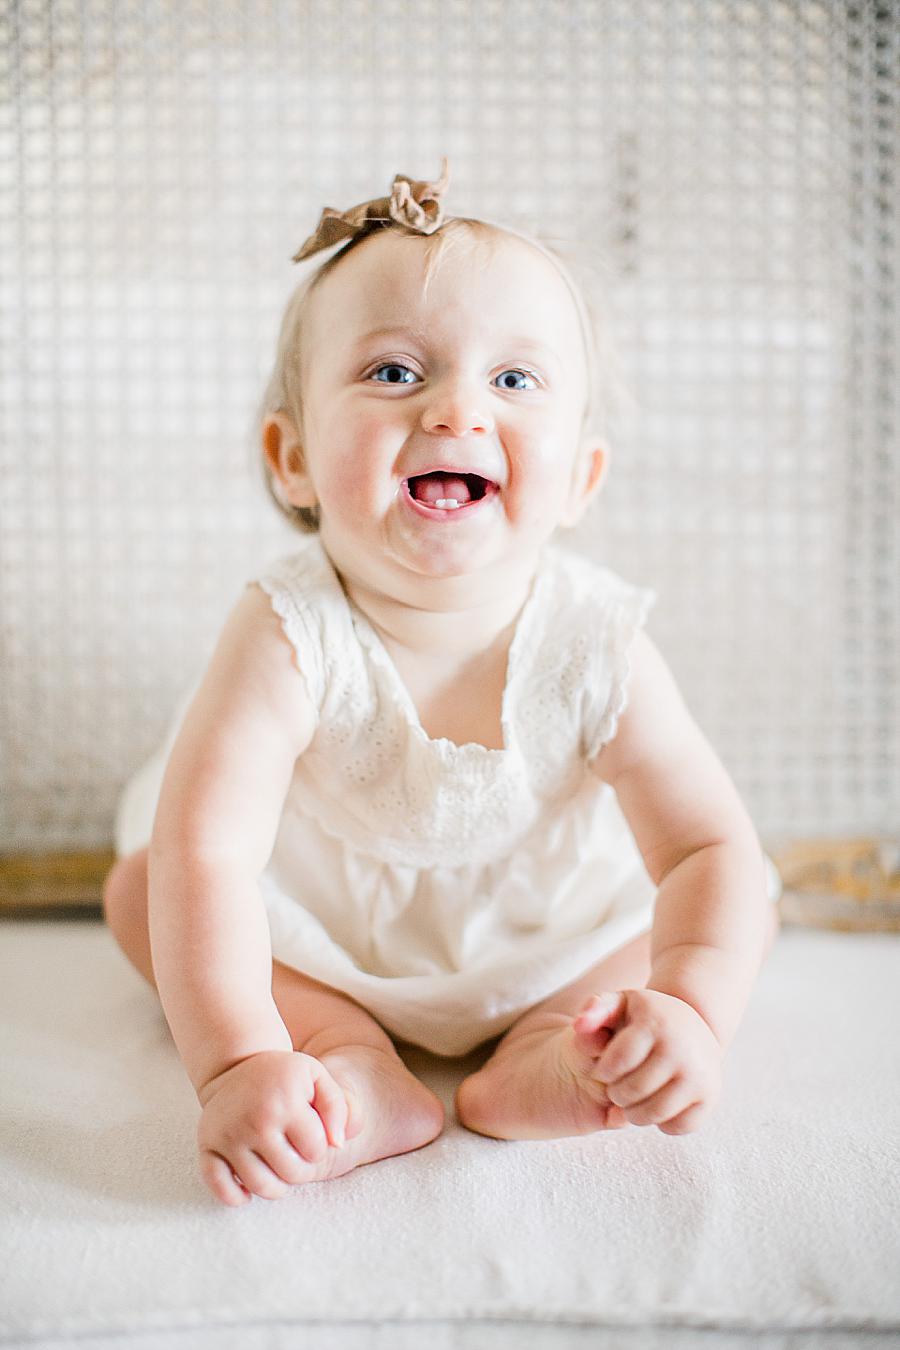 Smiling baby at this 12 month lifestyle session by Knoxville Wedding Photographer, Amanda May Photos.